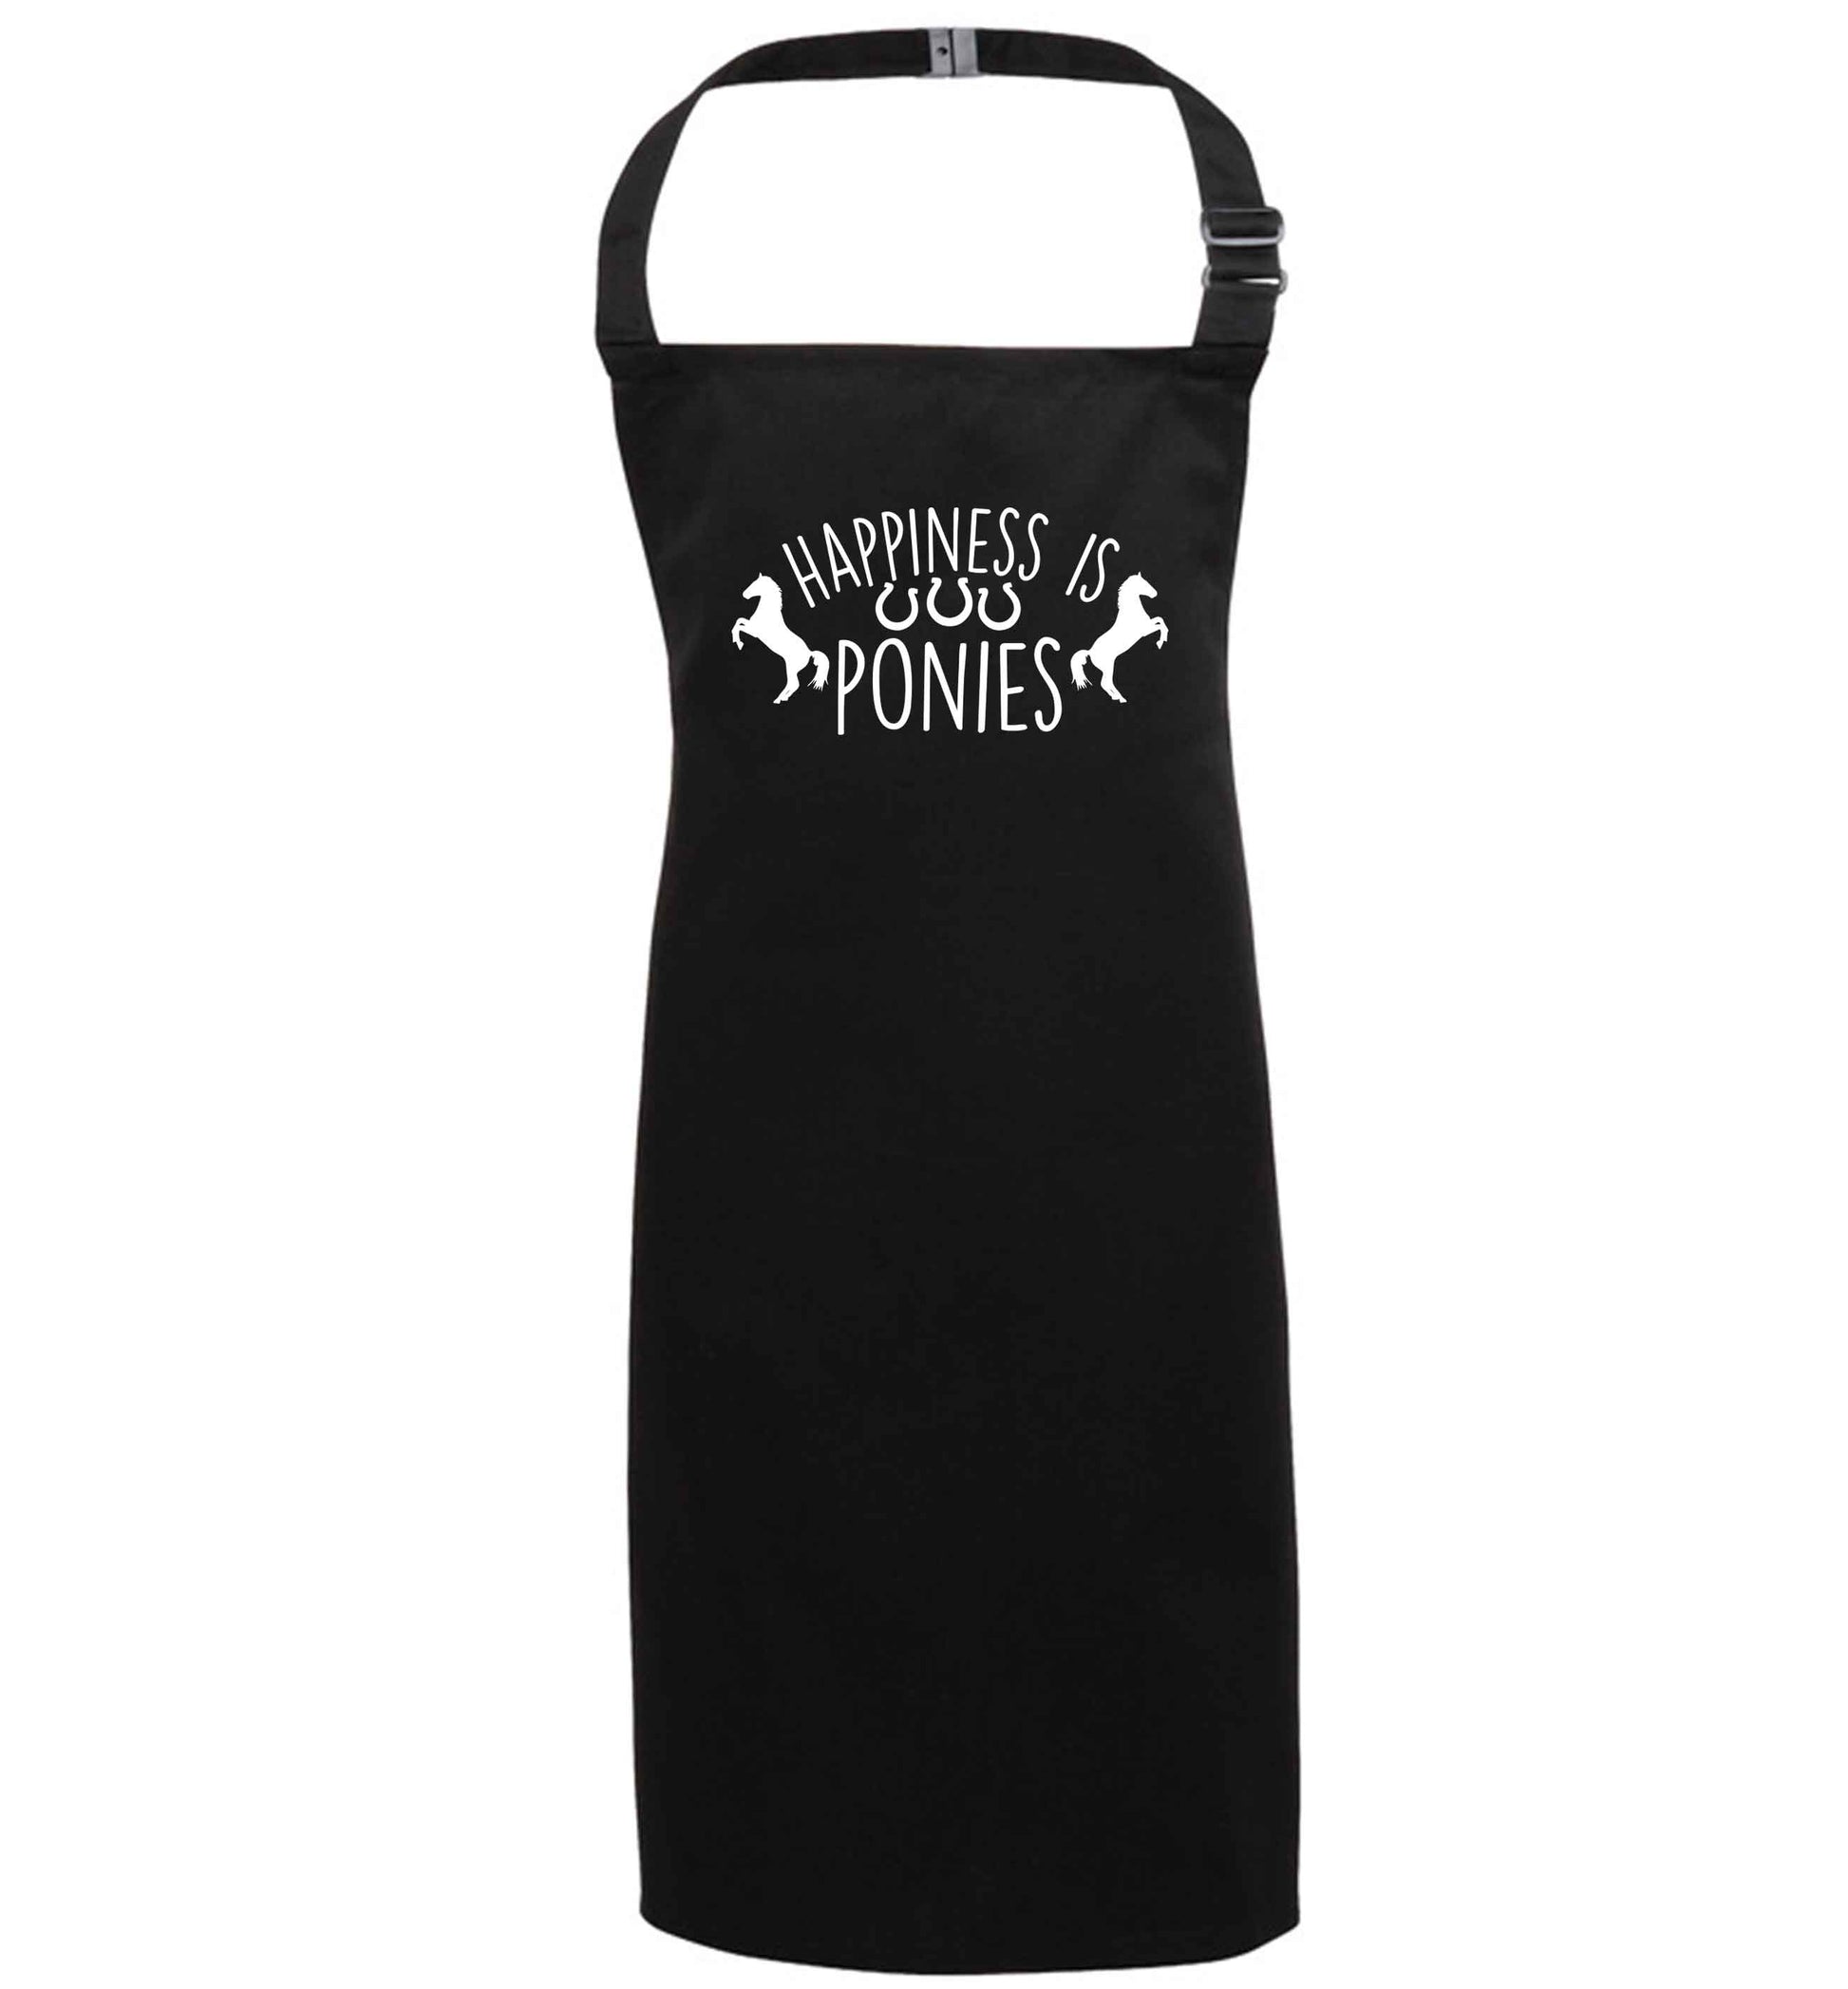 Happiness is ponies black apron 7-10 years